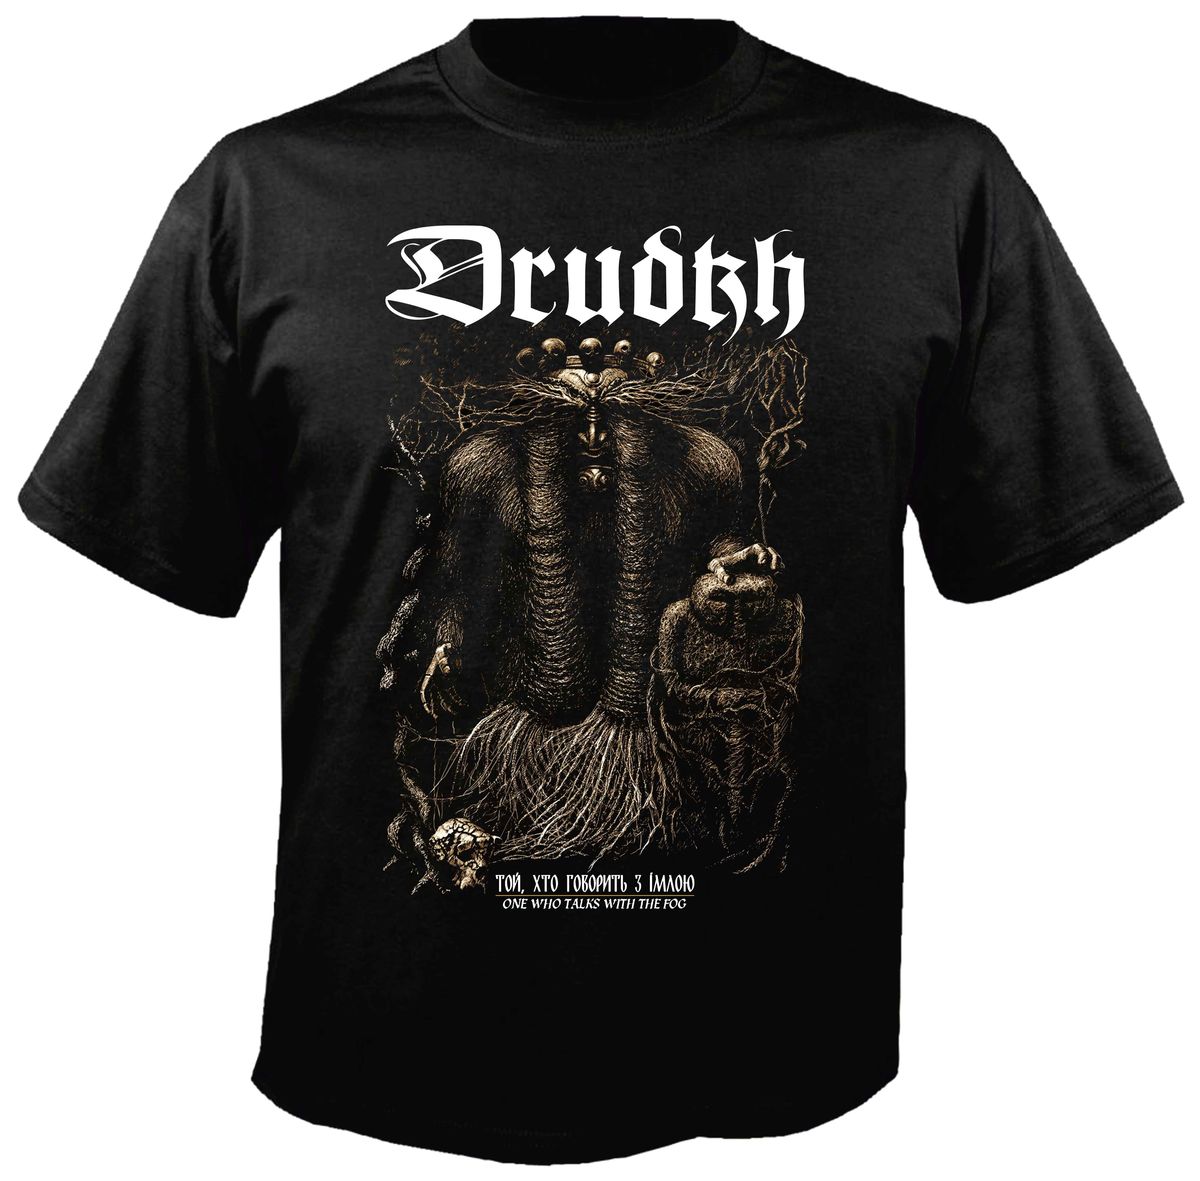 Drudkh Band T-Shirt – Metal & Rock T-shirts and Accessories